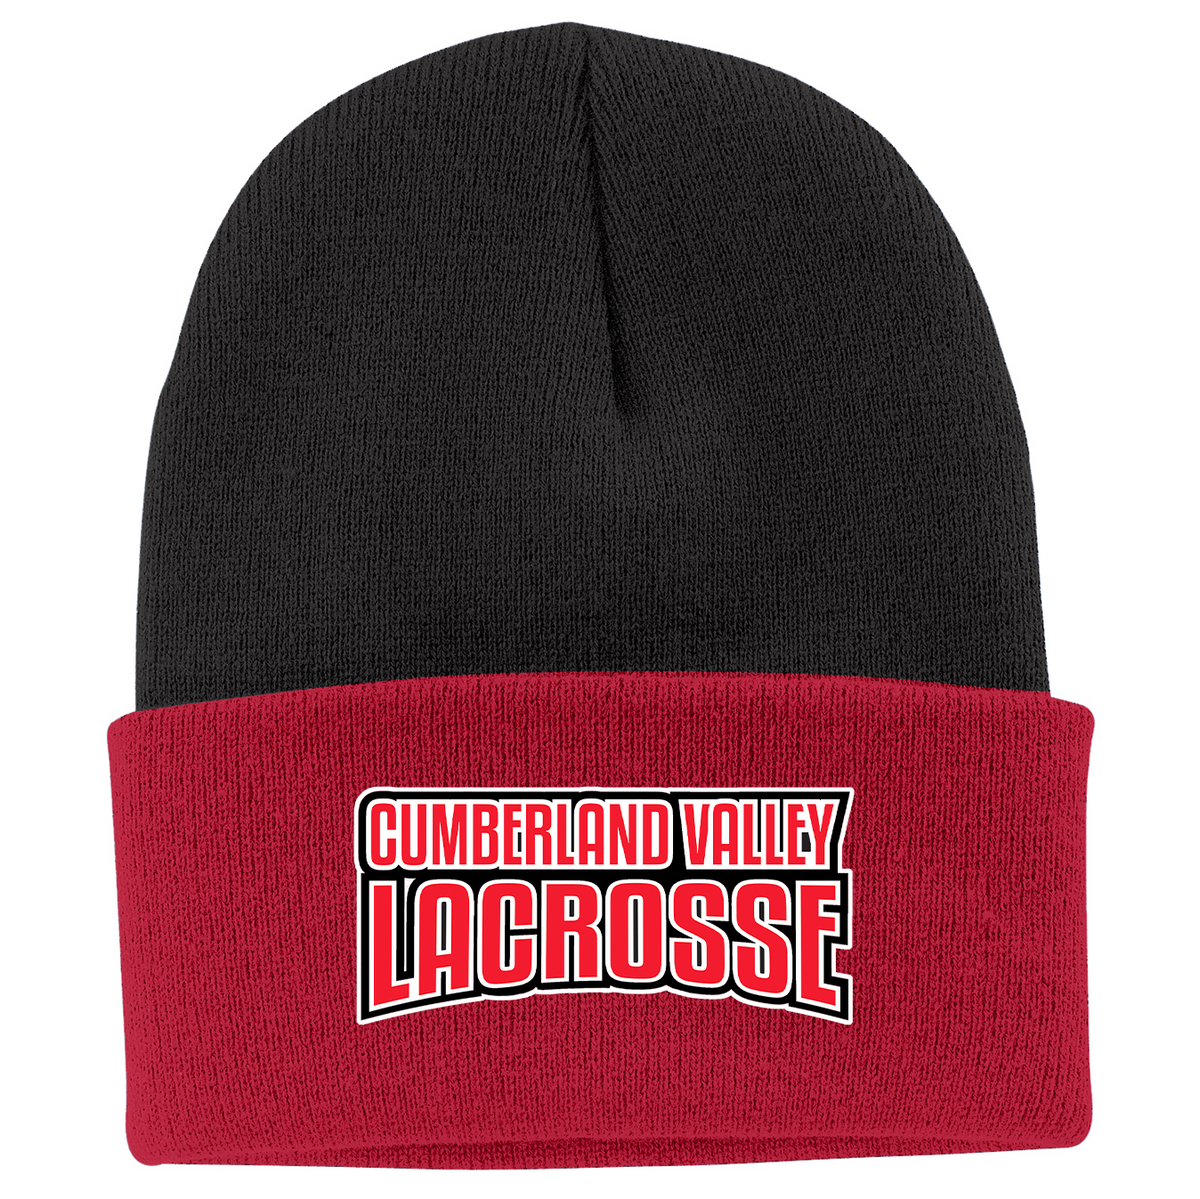 Cumberland Valley Lacrosse Knit Beanie